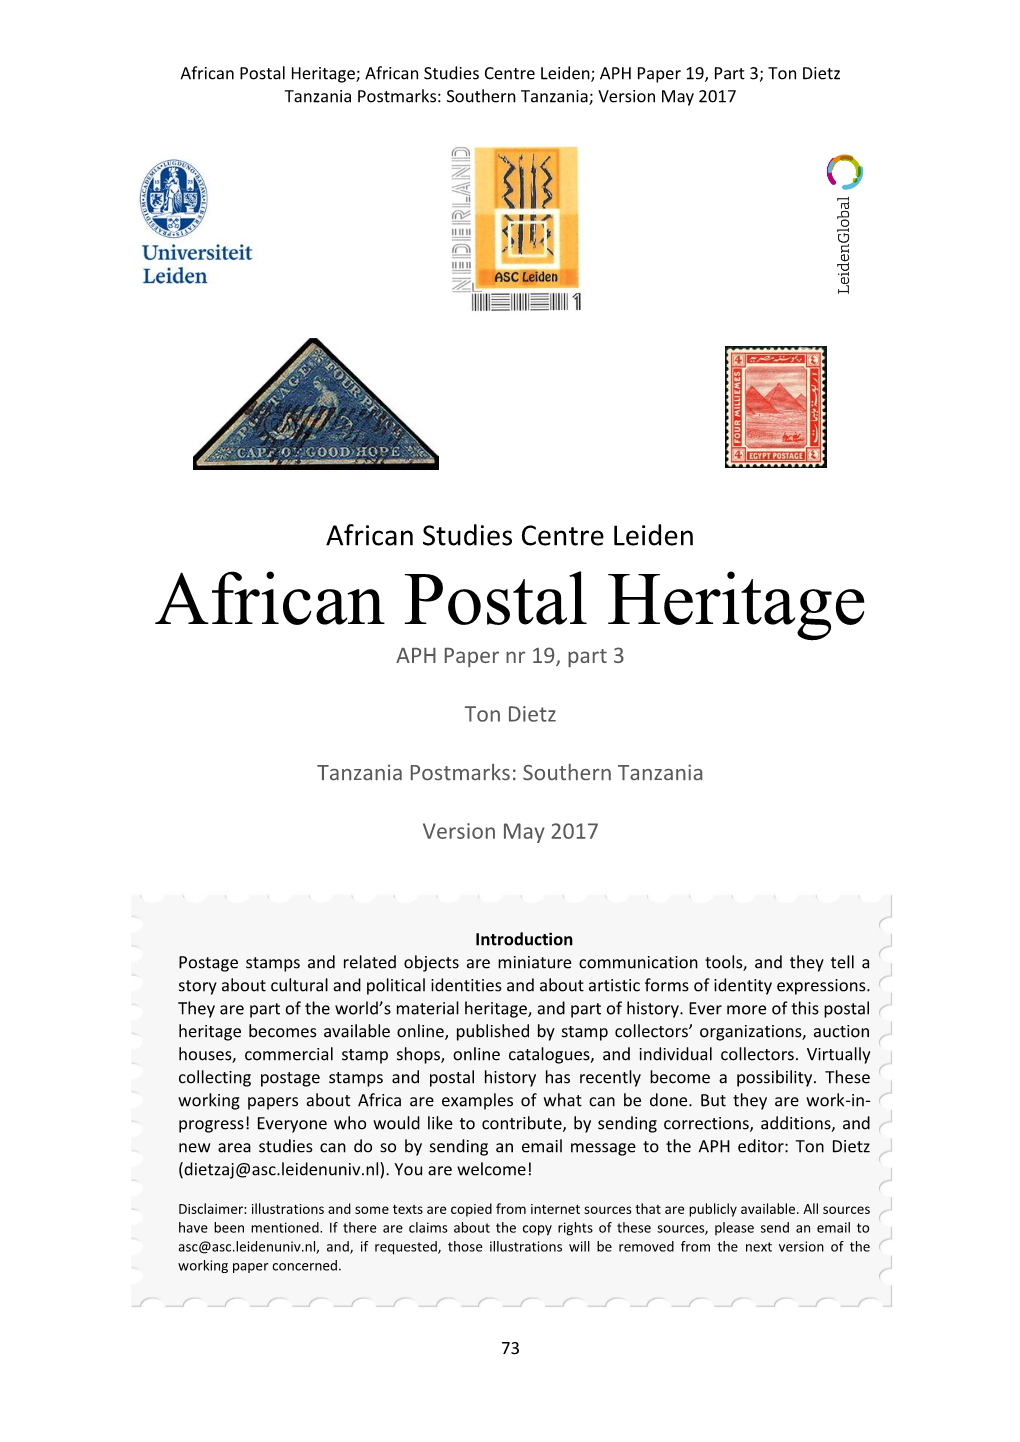 African Postal Heritage; African Studies Centre Leiden; APH Paper 19, Part 3; Ton Dietz Tanzania Postmarks: Southern Tanzania; Version May 2017